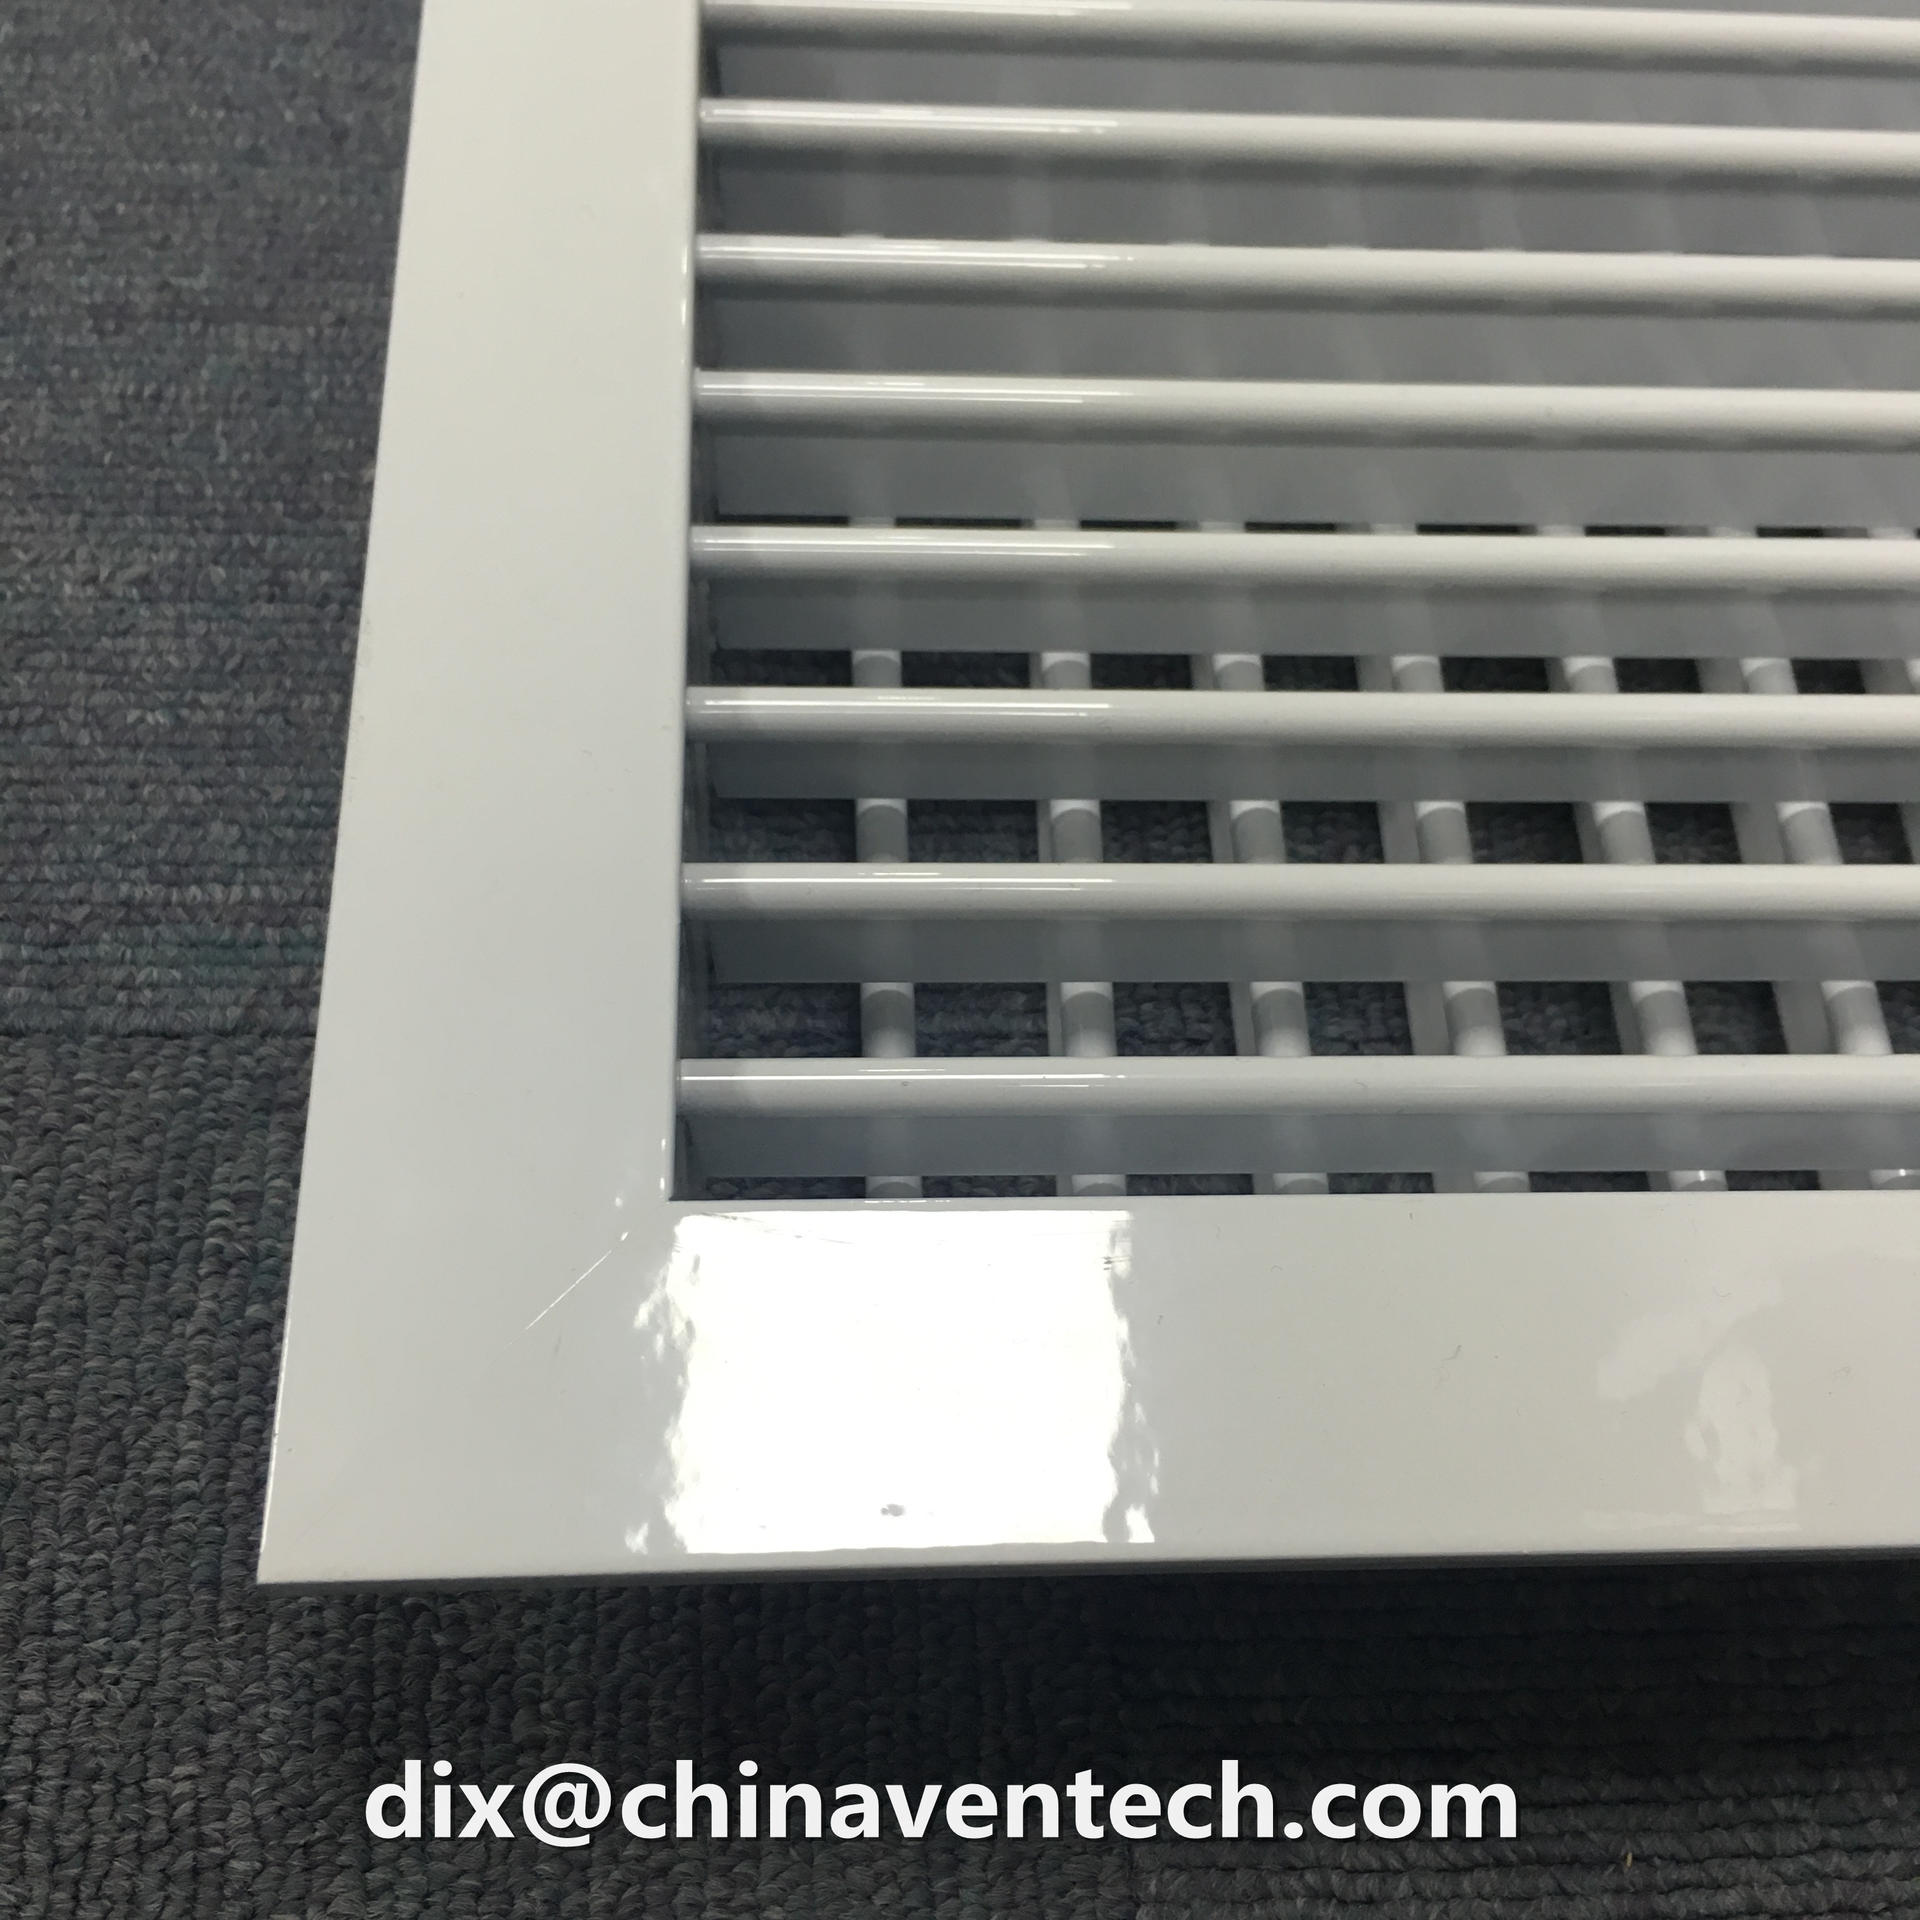 Hvac wall mounted free sample ceiling ventilation double deflection supply air grille with obd